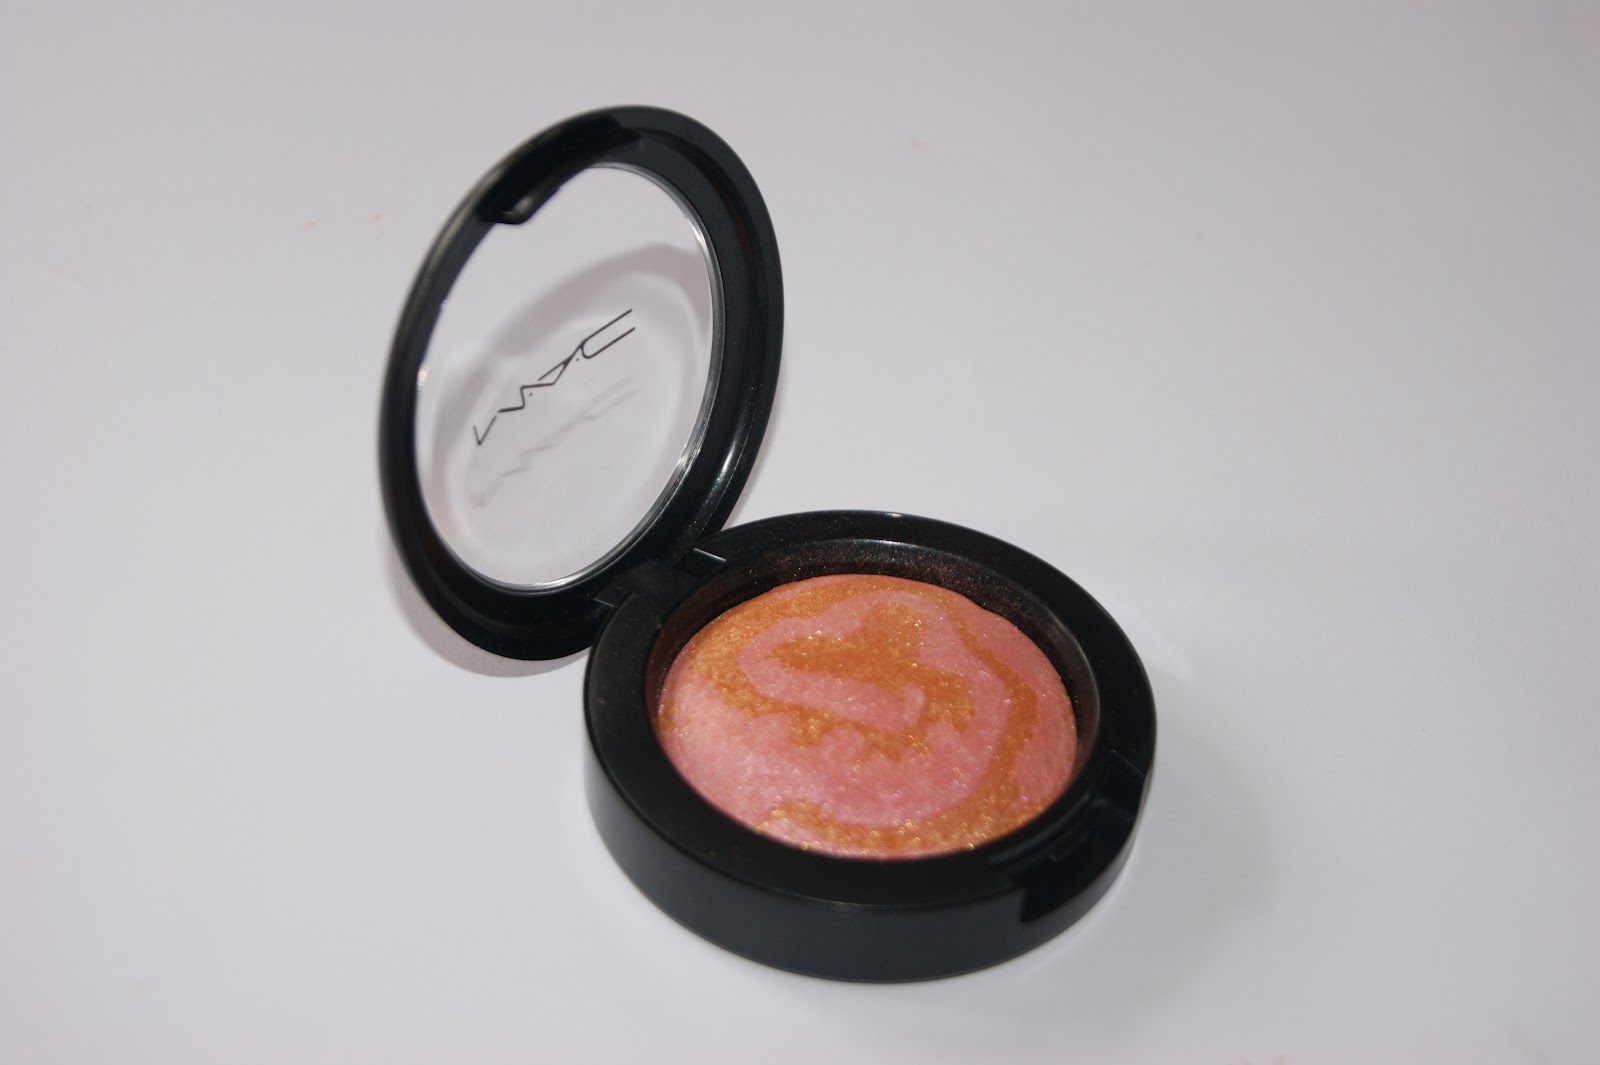 MAC Solar Ray Mineralize Blush - Review